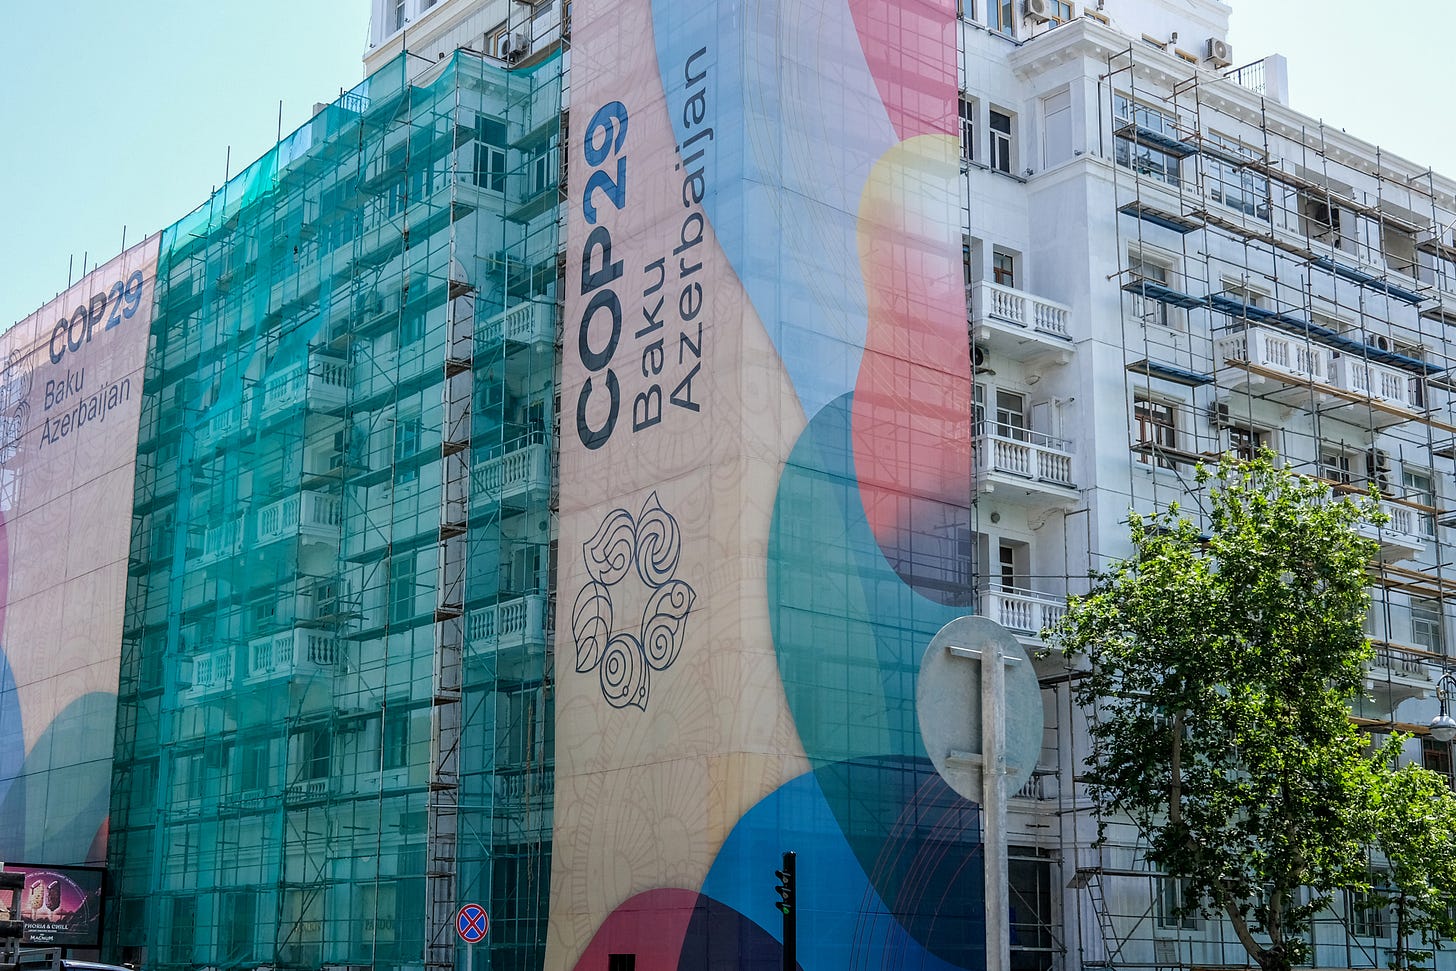 A building is under construction on June 14 in preparation for the upcoming COP29 climate summit in Baku, Azerbaijan. Credit: Aziz Karimov/Getty Images